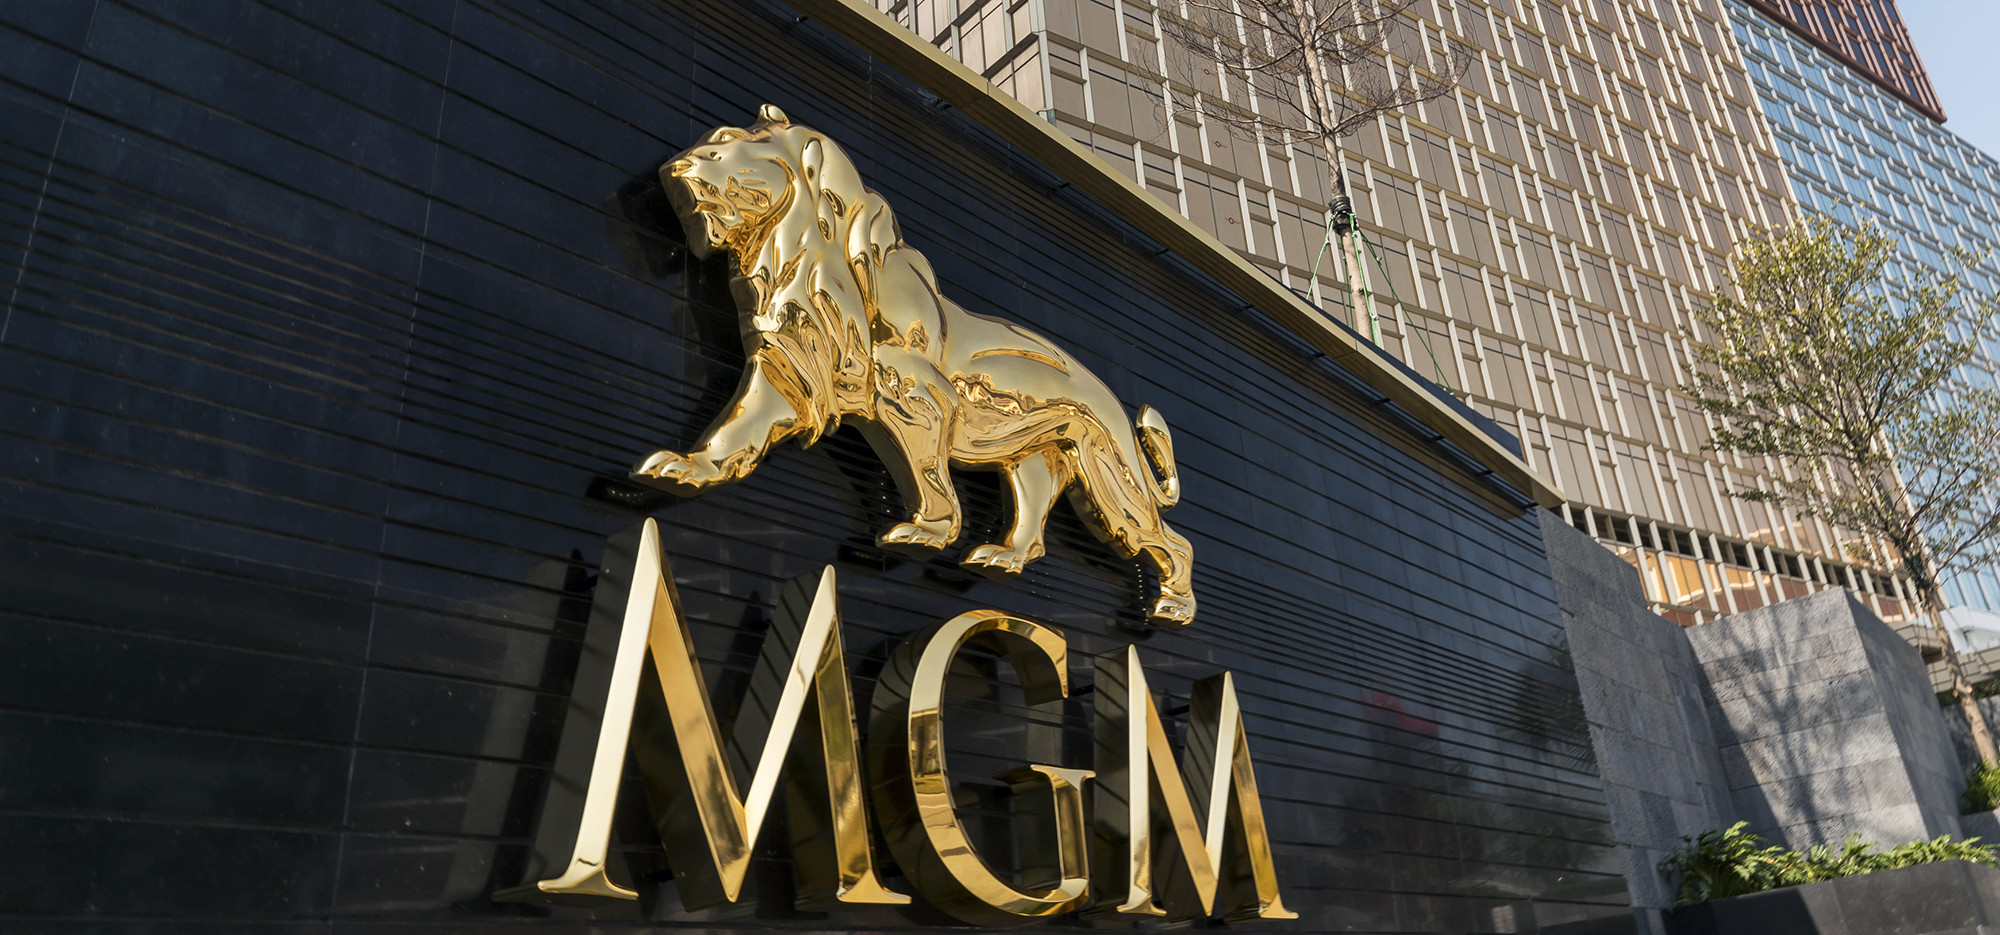 MGM Eyes Ways to Get Control of BetMGM With U.K. Partner in Play - Bloomberg